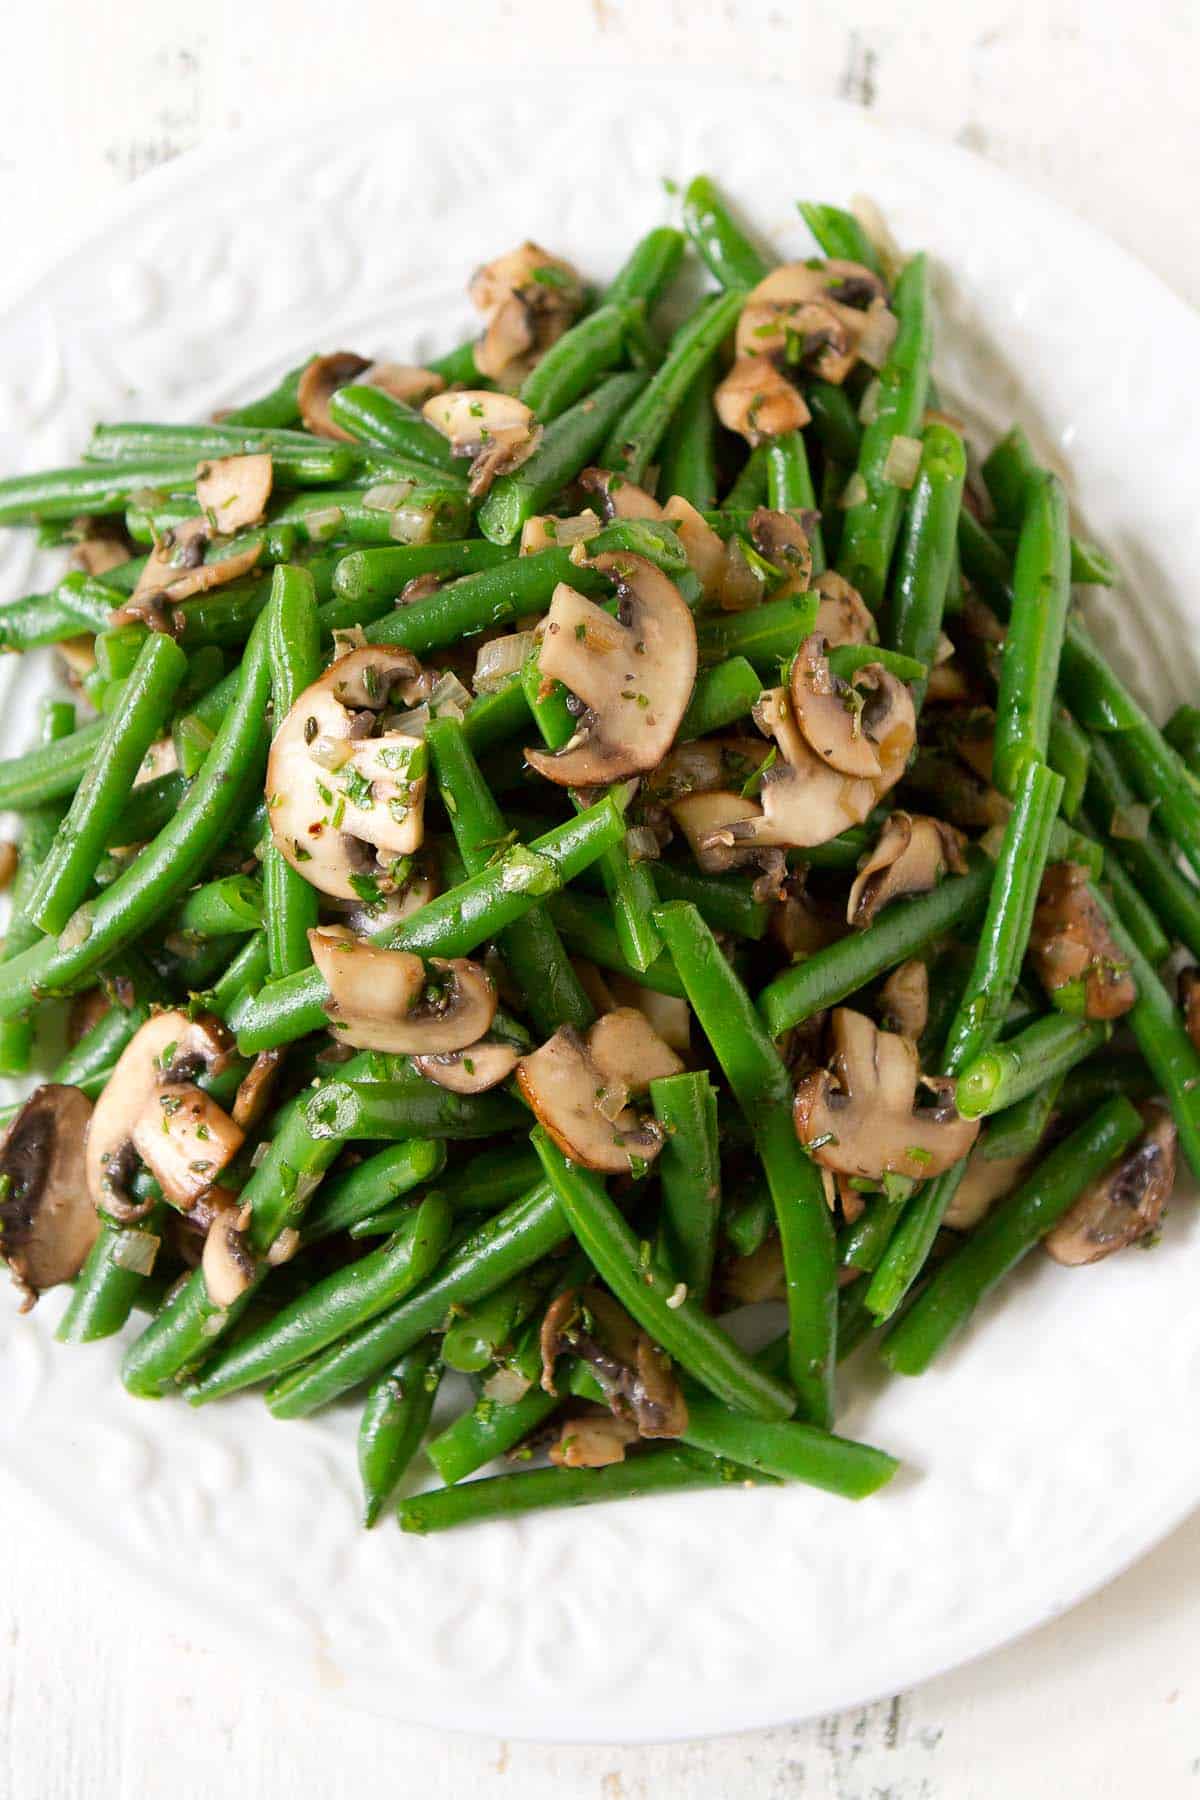 Sautéed green beans and mushrooms are quick and easy to make. Serve them as a fresh holiday side dish or with a weeknight meal. Light, vegan side dish that everyone will love! | Recipe | Skillet | Stovetop | Thanksgiving | Vegan | Plant Based 